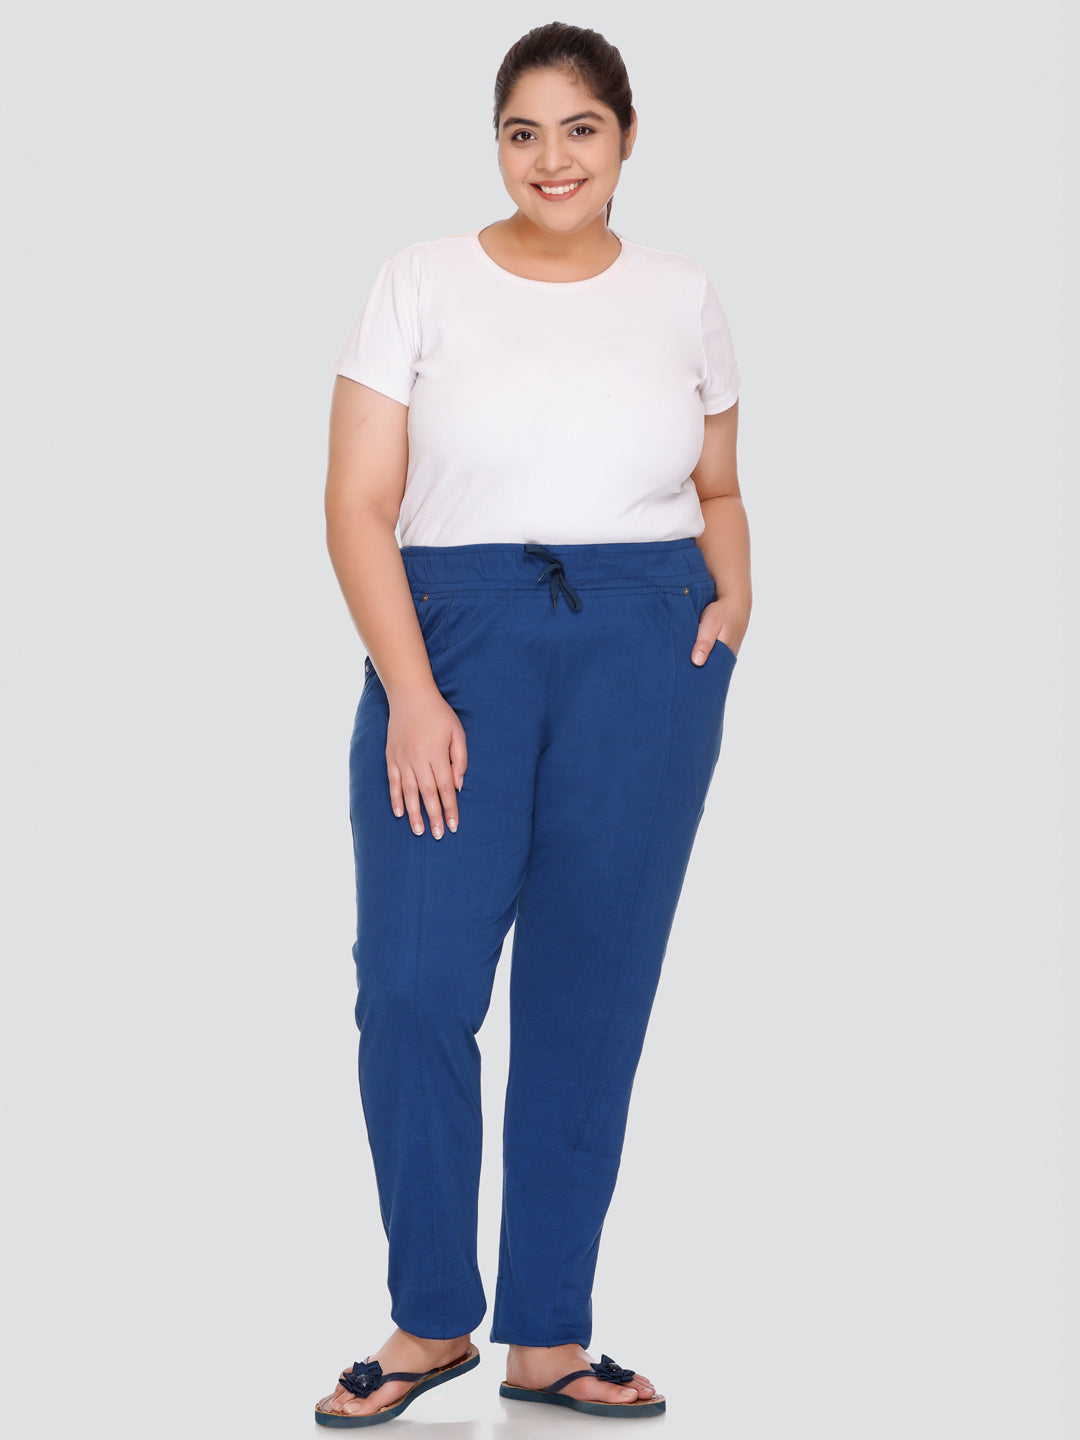 Soft Blue Cotton Relaxed Fit Lounge Track Pants For Women At Best Prices